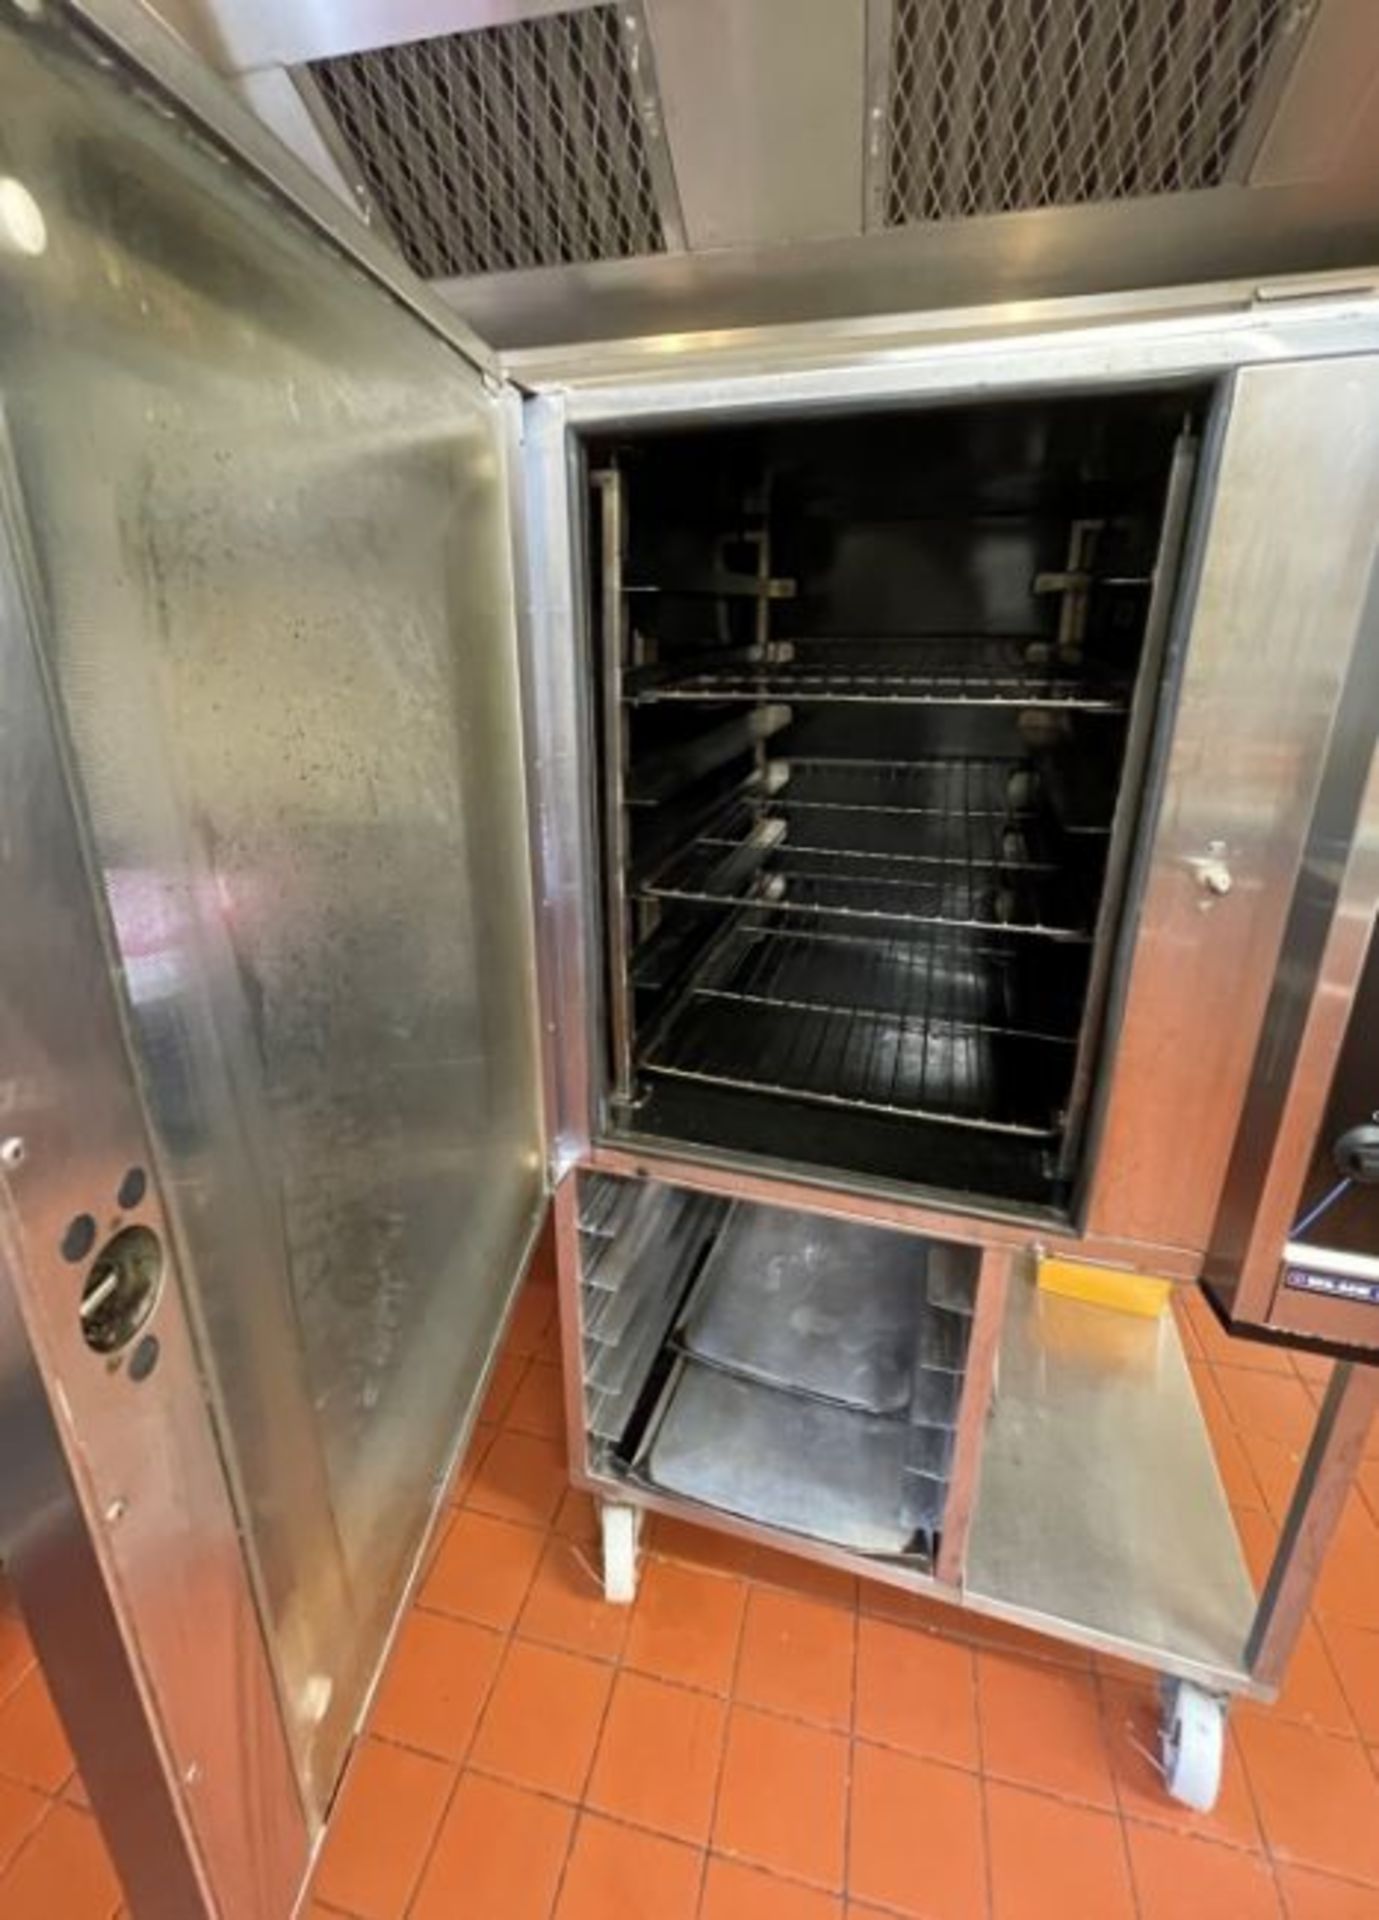 1 x Blue Seal Moffat Turbofan E35 Convection Oven With Stand - Model E35-30-453 - 400v Power - - Image 6 of 16